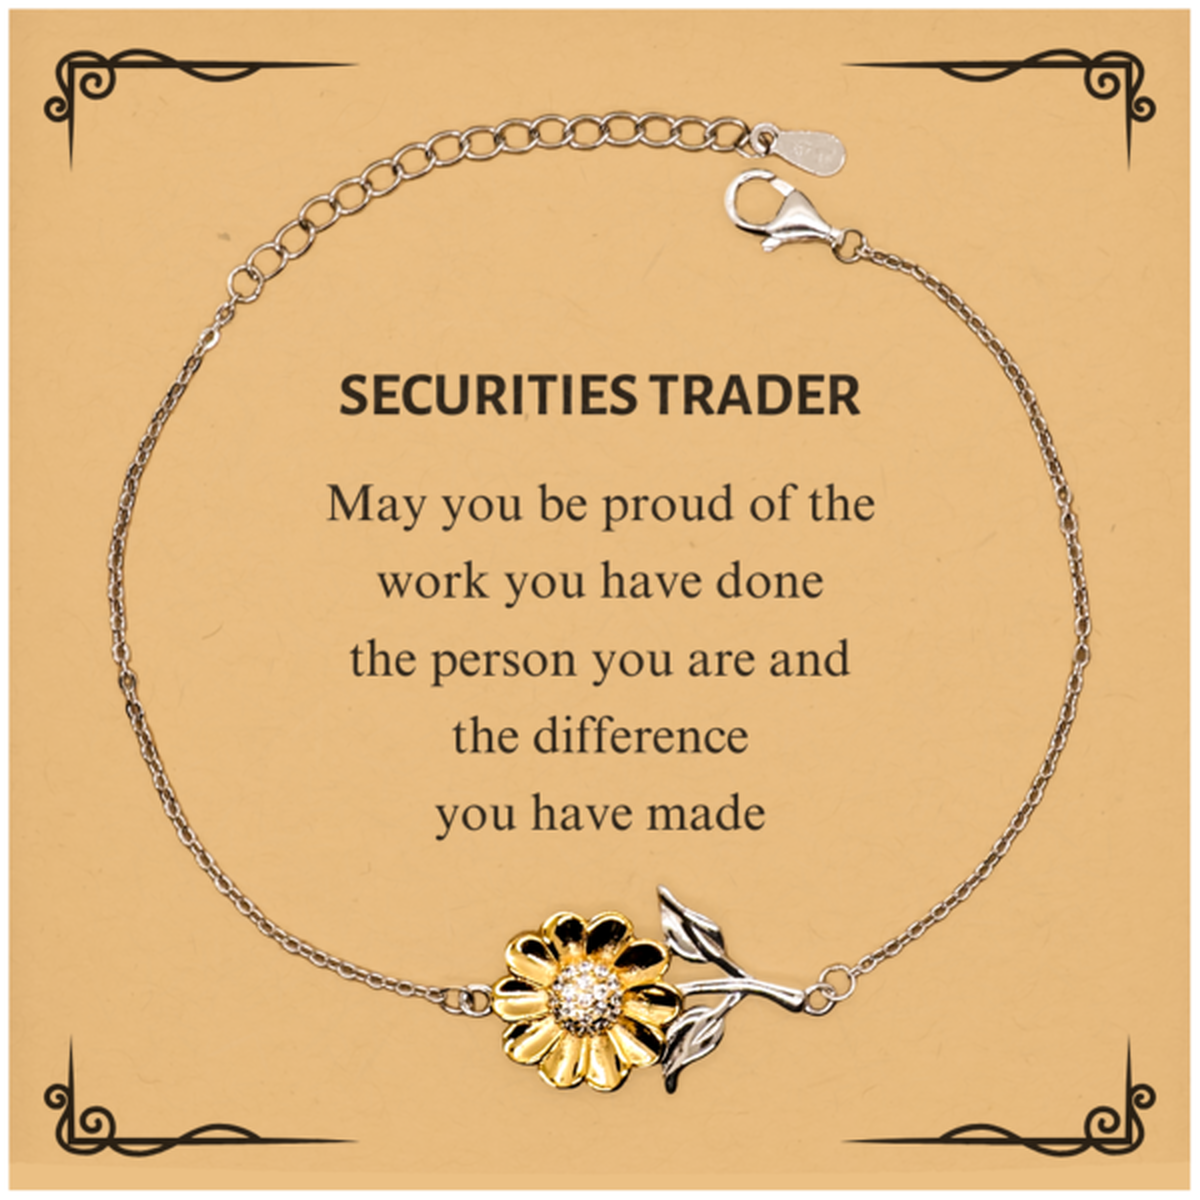 Securities Trader May you be proud of the work you have done, Retirement Securities Trader Sunflower Bracelet for Colleague Appreciation Gifts Amazing for Securities Trader